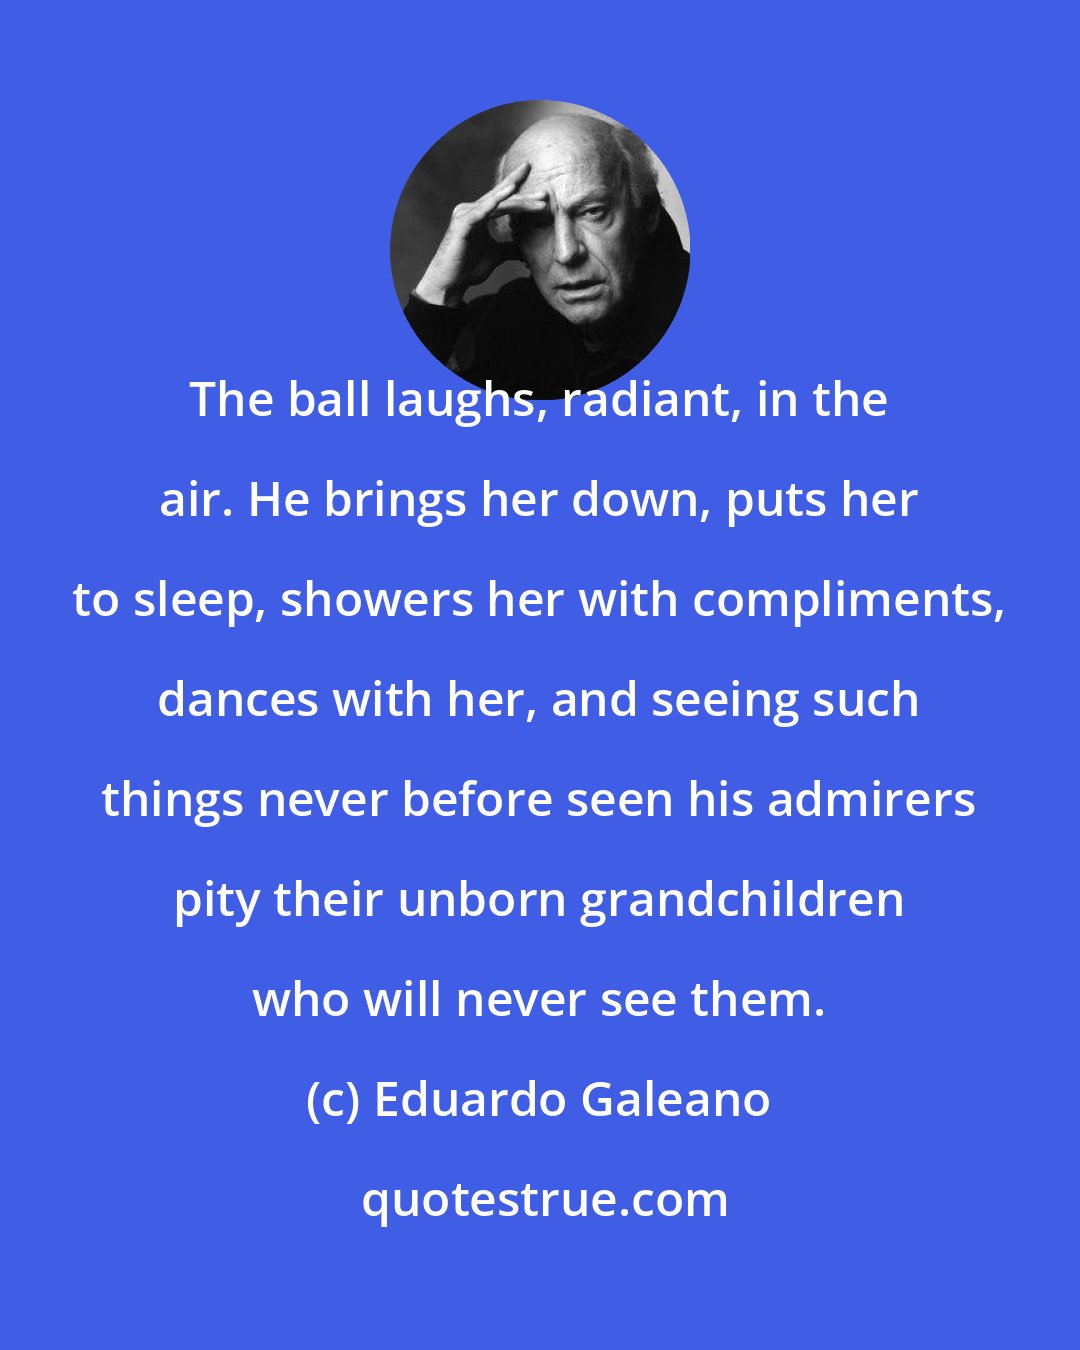 Eduardo Galeano: The ball laughs, radiant, in the air. He brings her down, puts her to sleep, showers her with compliments, dances with her, and seeing such things never before seen his admirers pity their unborn grandchildren who will never see them.